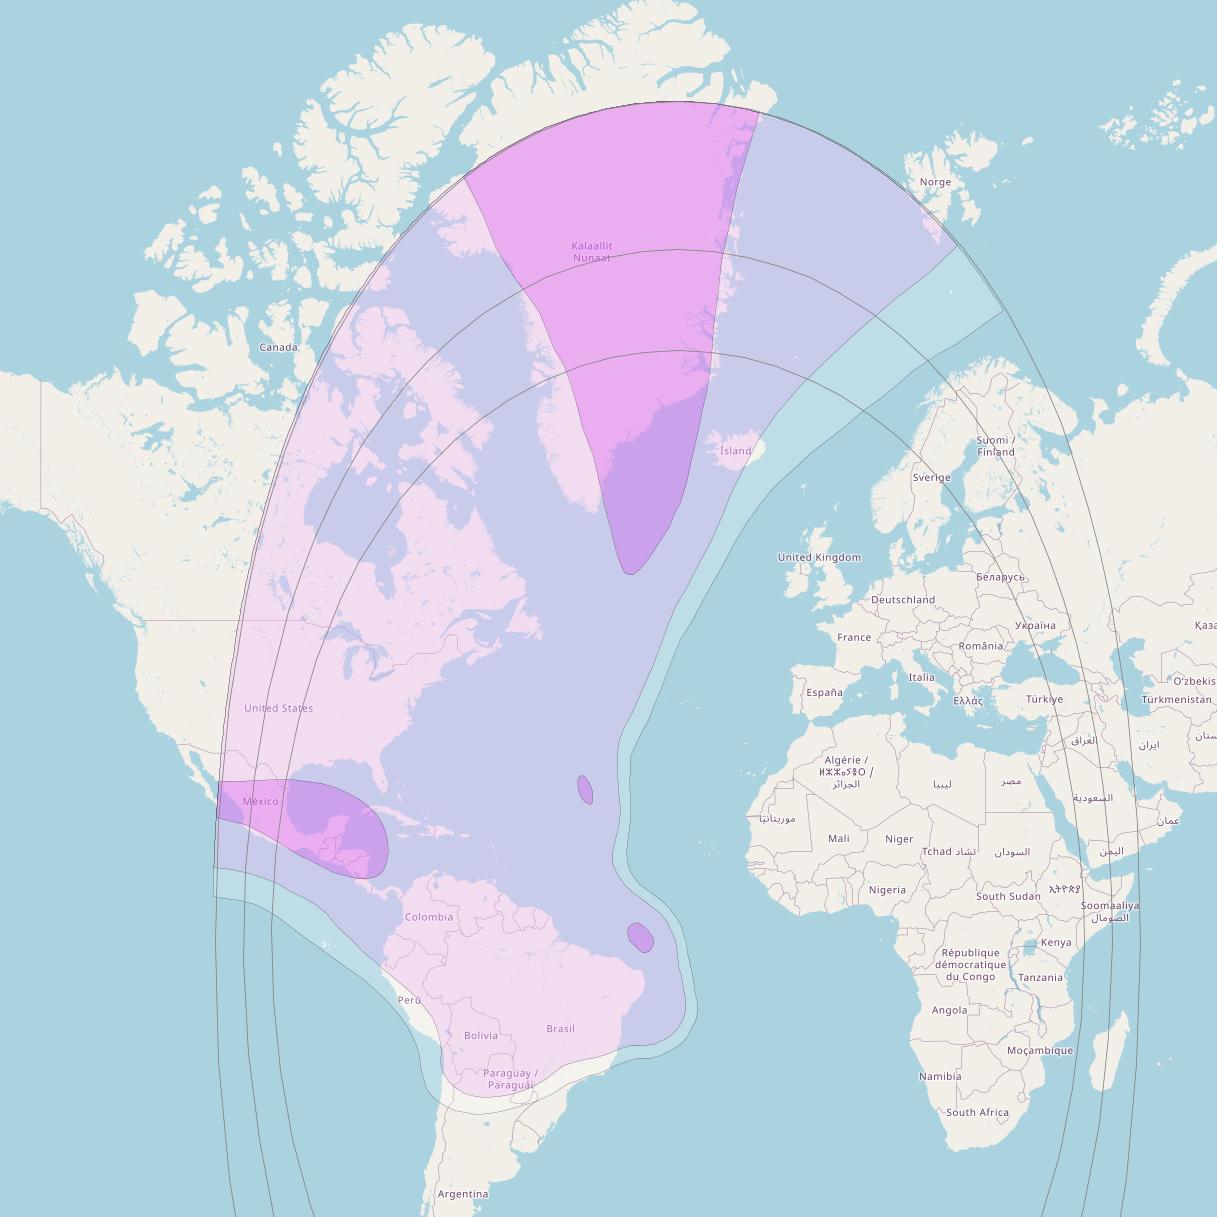 Intelsat 904 at 29° W downlink C-band West Hemi beam coverage map